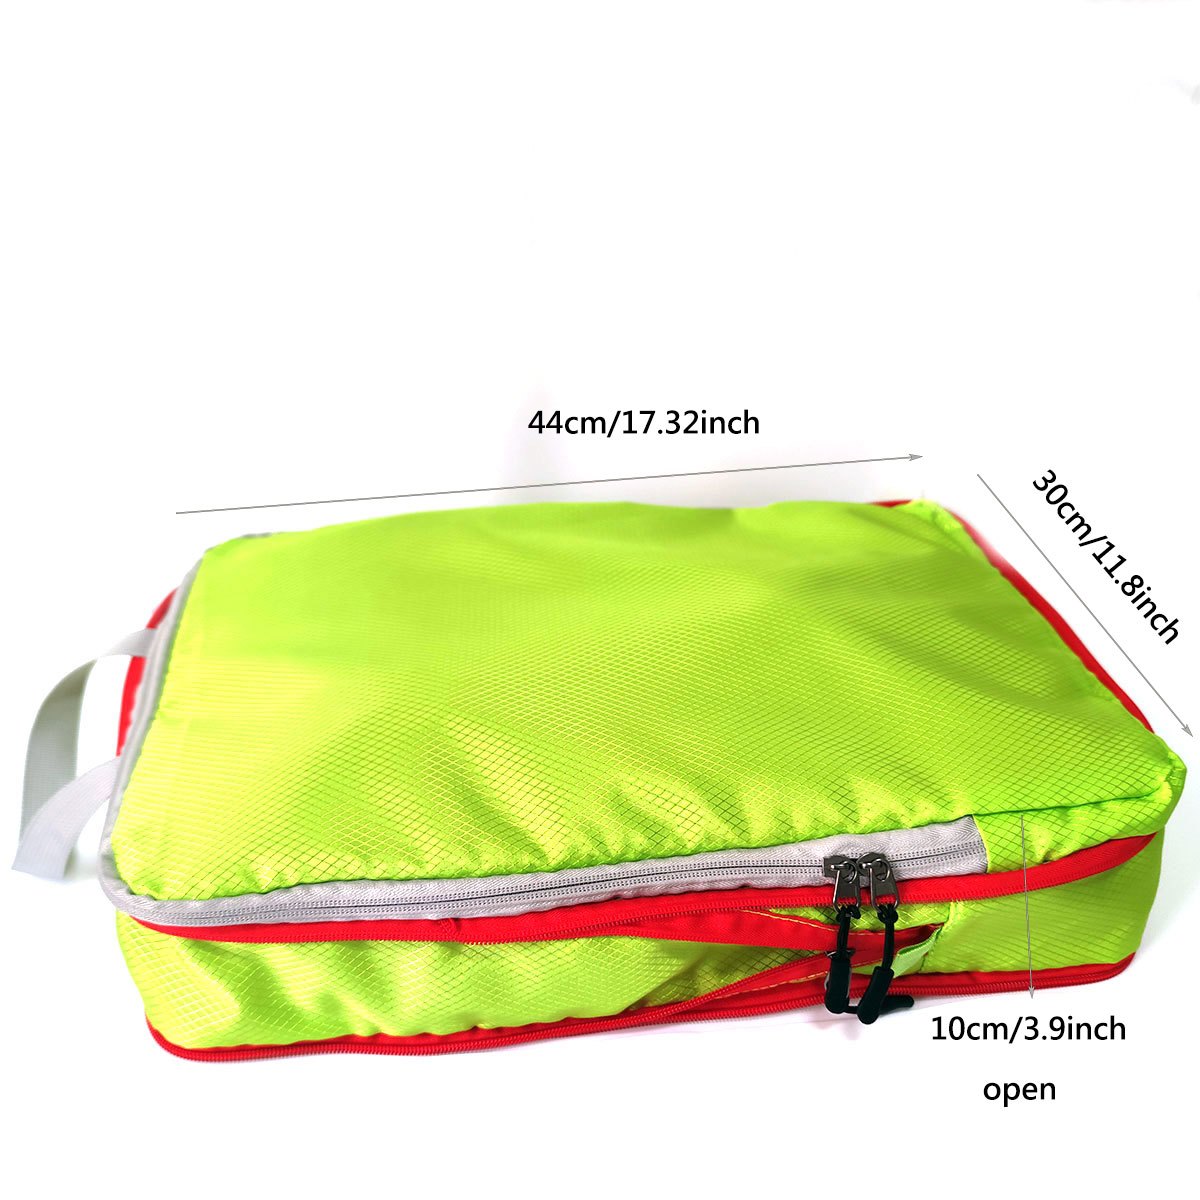 Compression Packing Cubes for Travel (6 Piece, White & Green